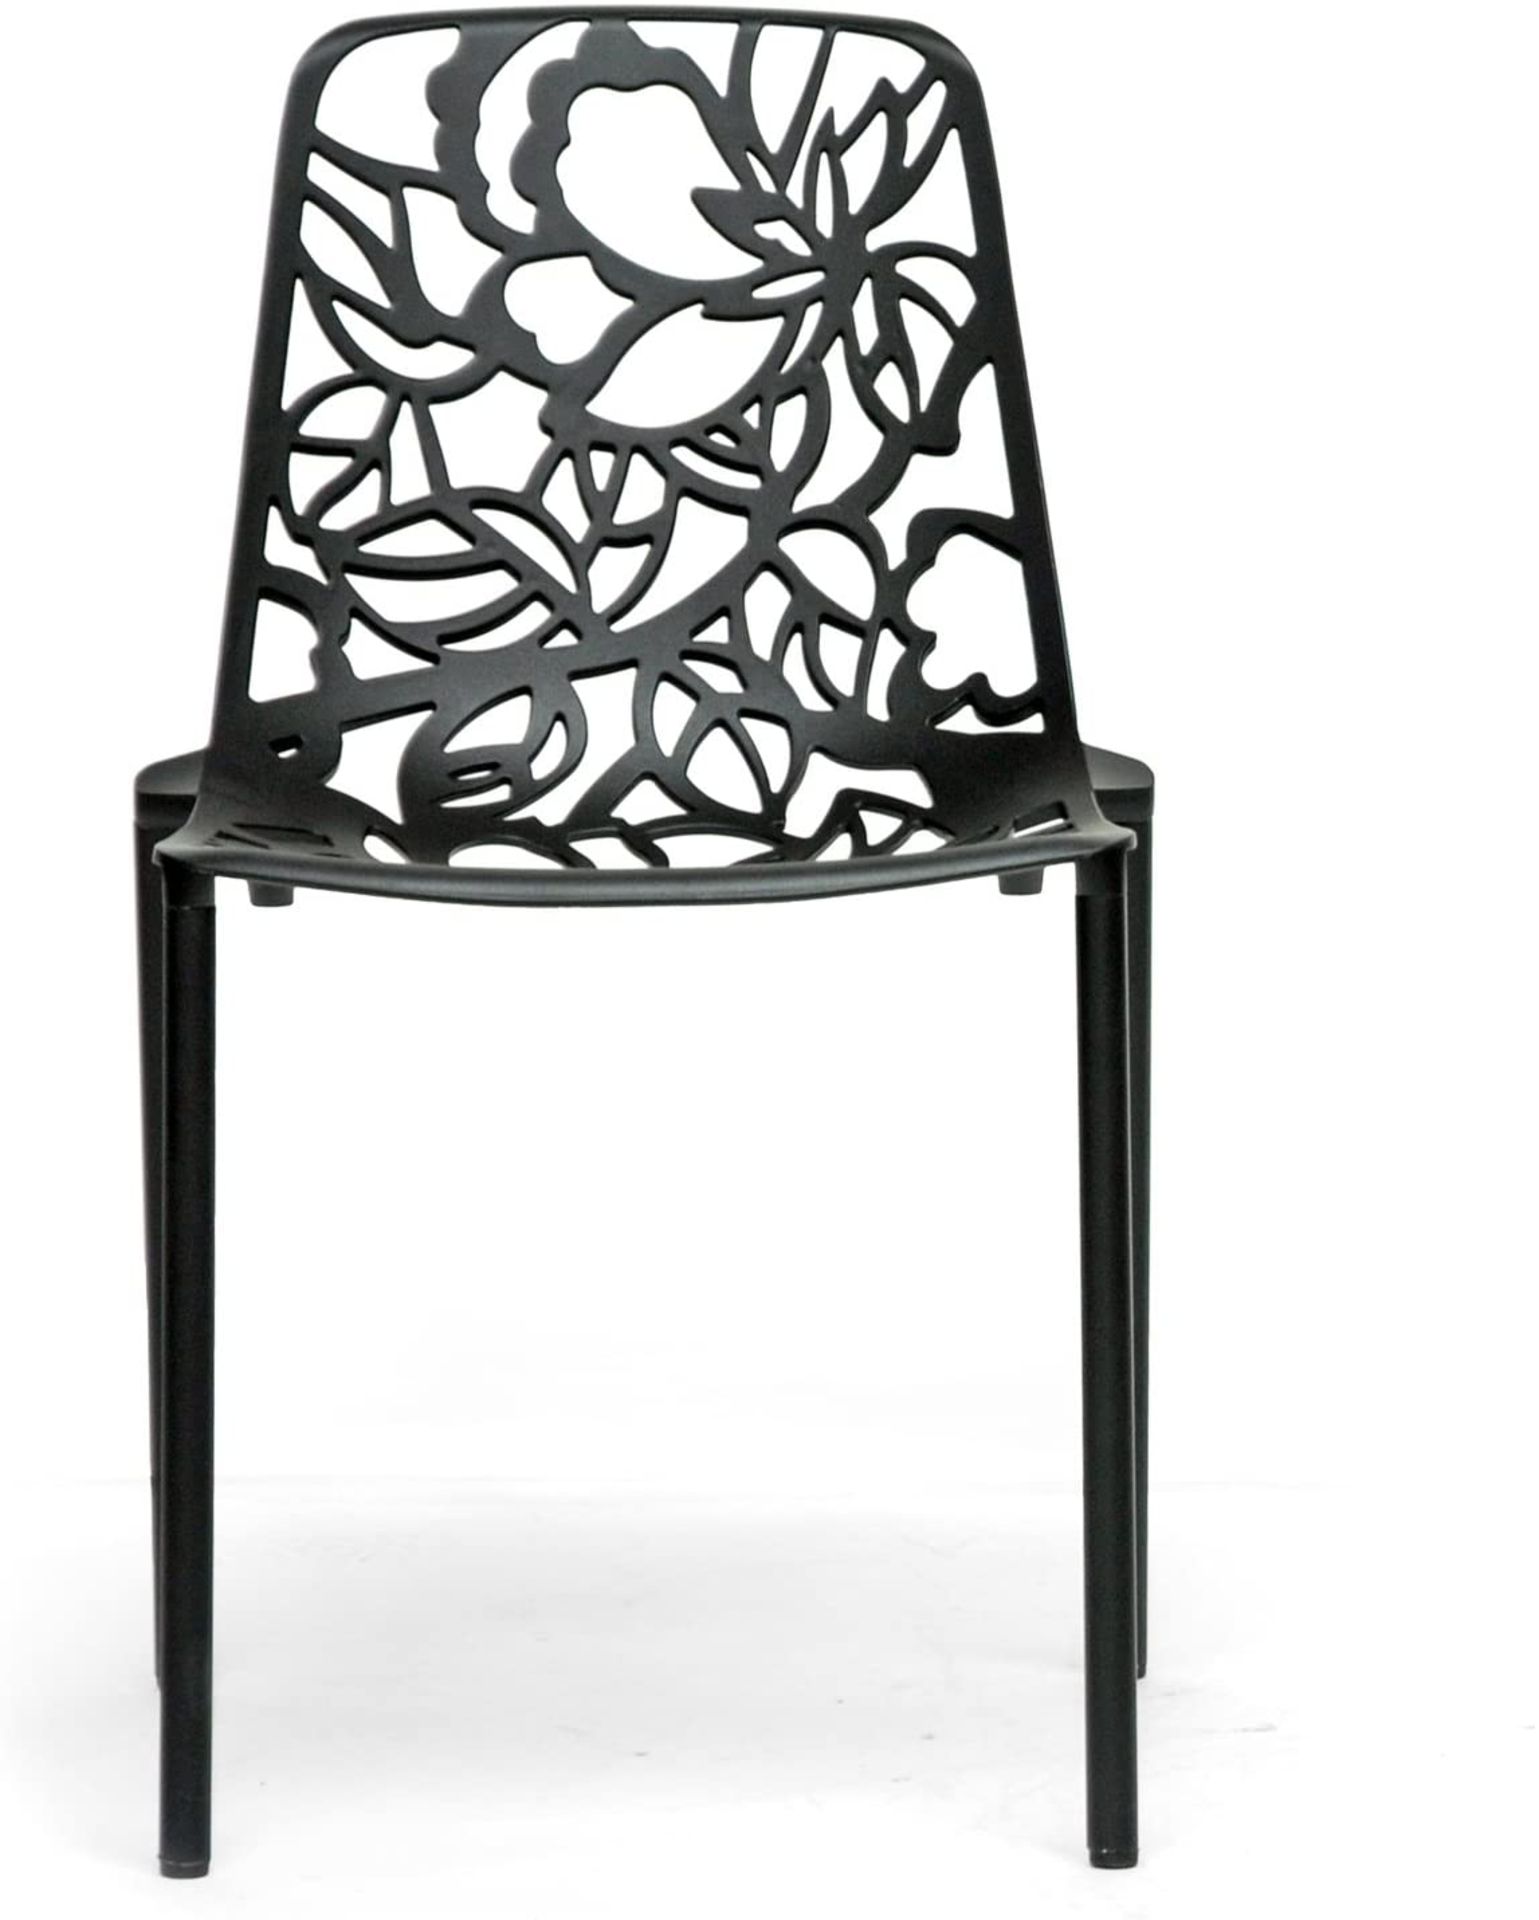 4 x Metal Modern Designer Dining Chairs With A Floral Filigree Design - Brand New Boxed Stock - Image 4 of 4